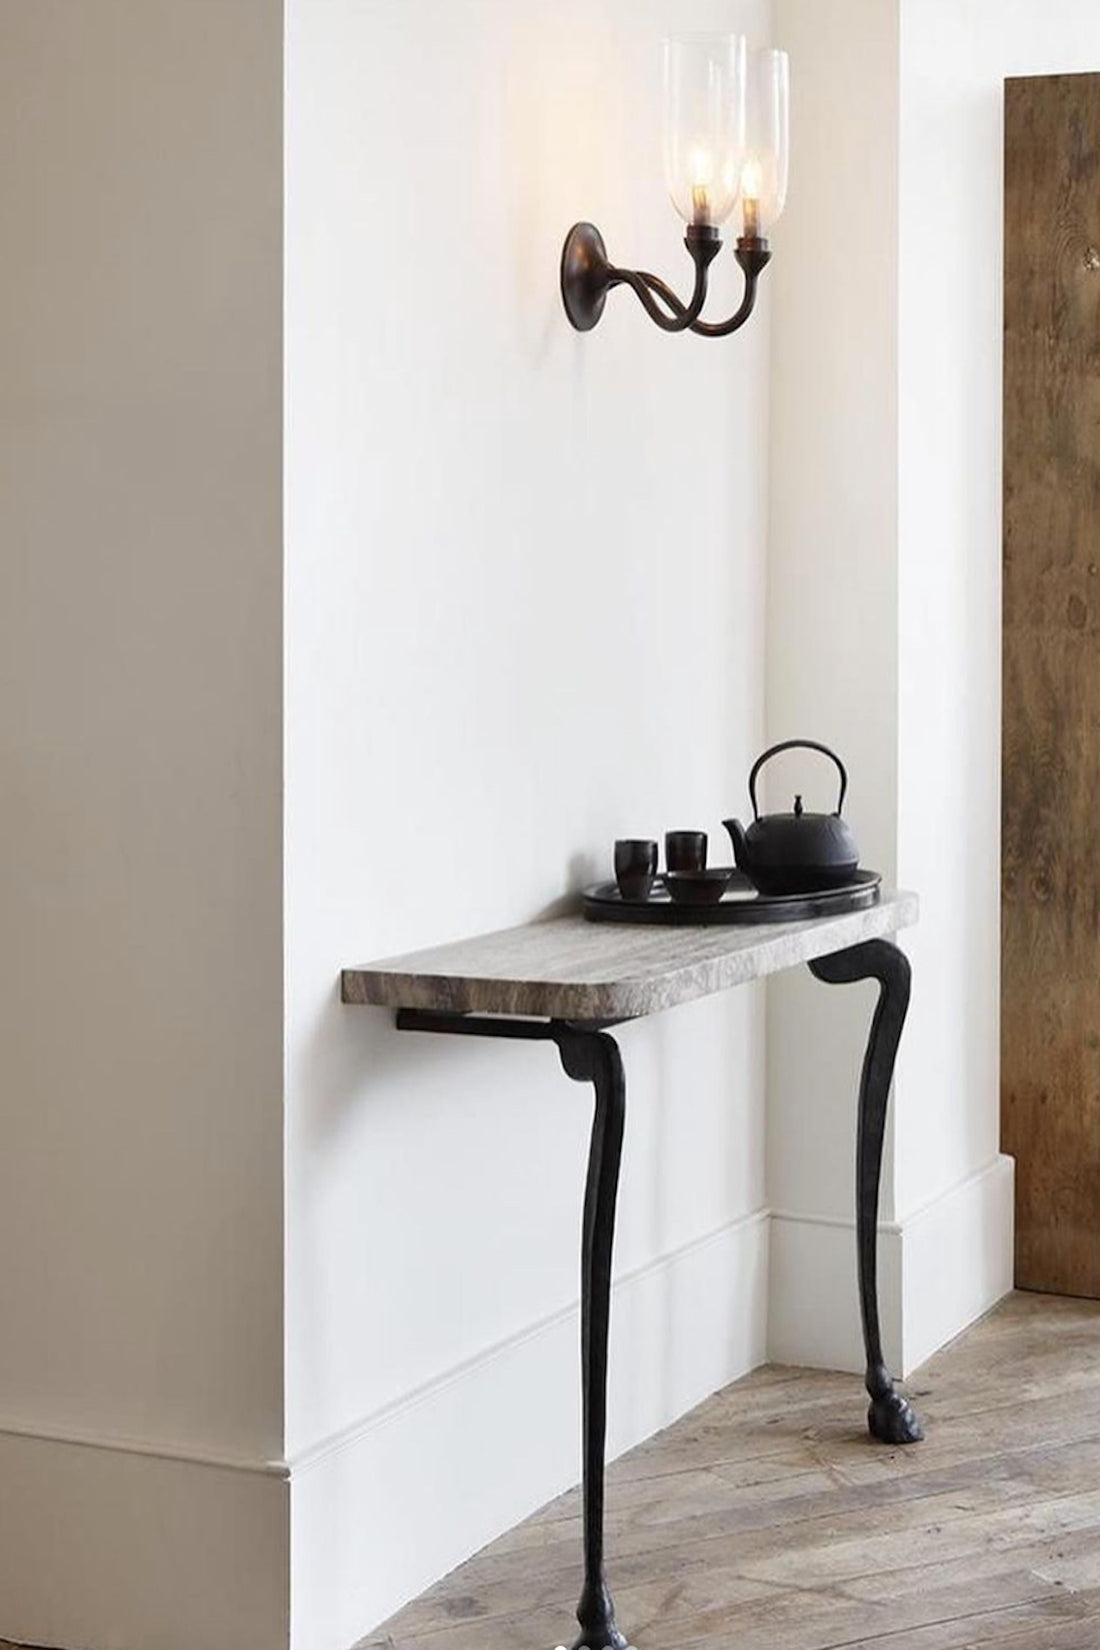 Rose Uniacke Curved Double Arm Wall Light for Dunlin